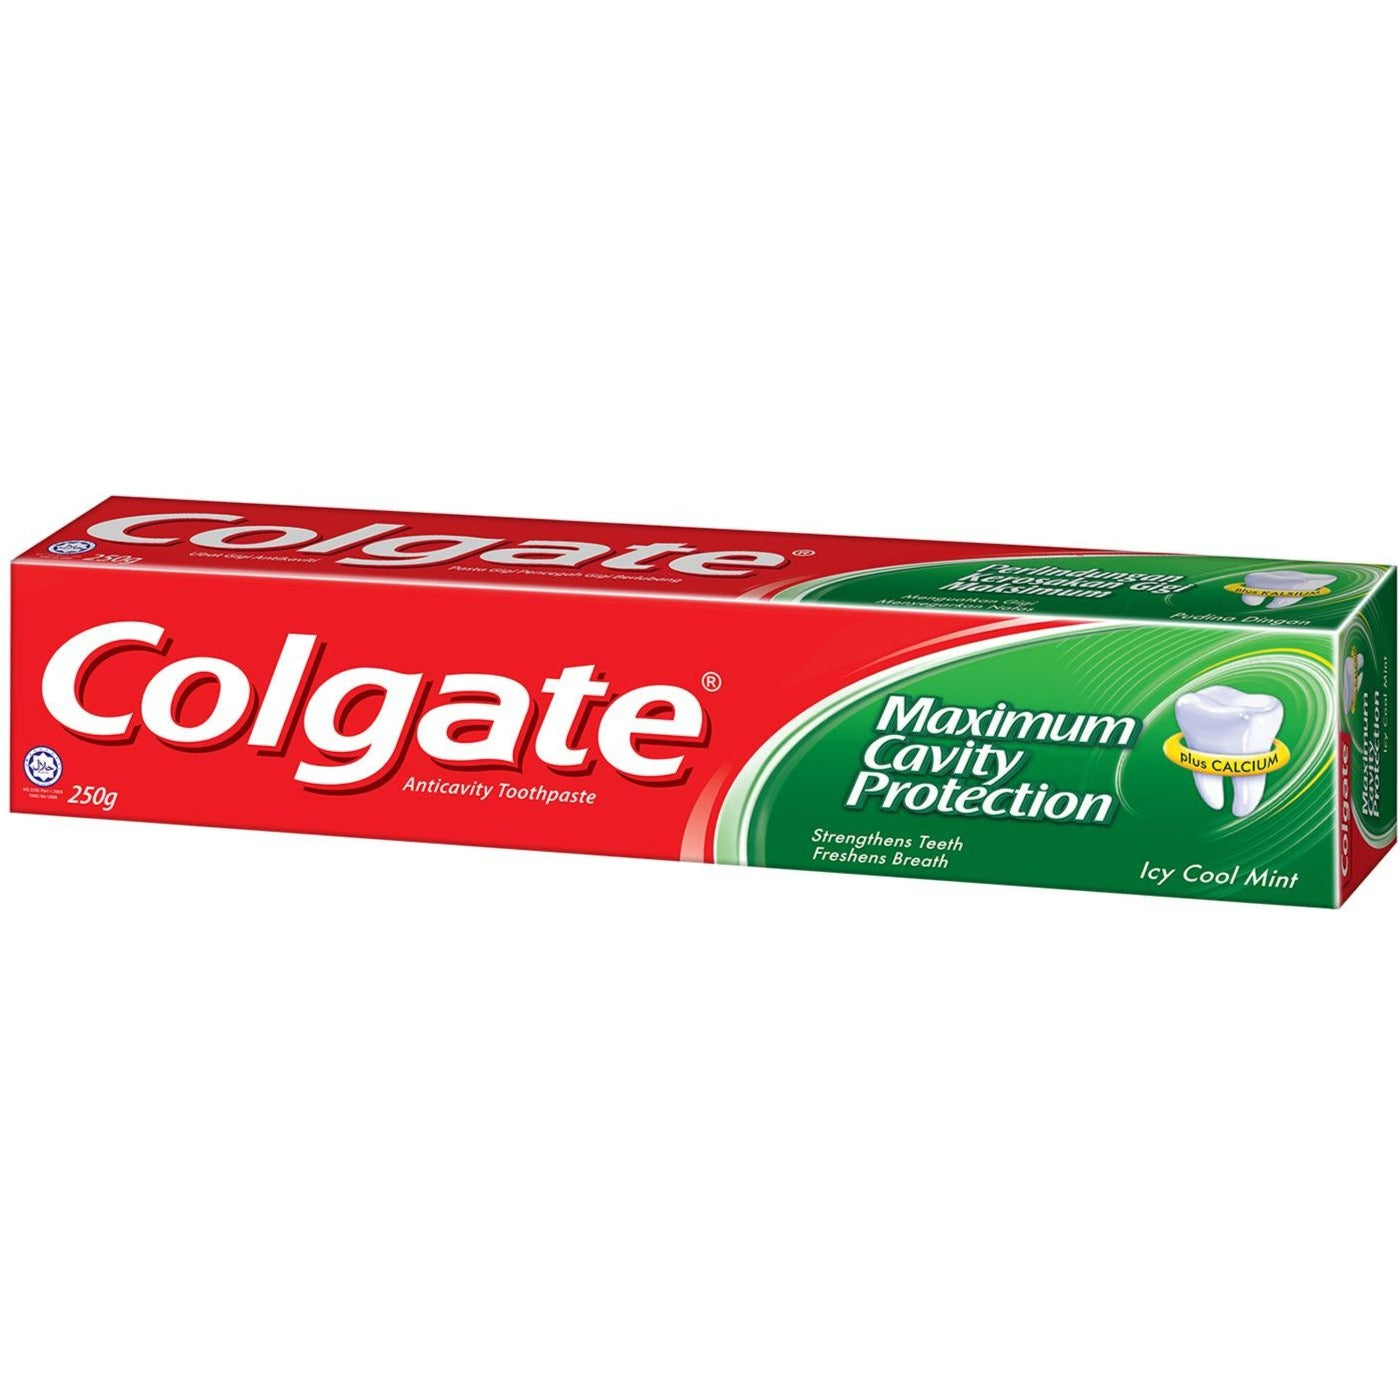 Colgate Toothpaste Max Cavity Protection 175g